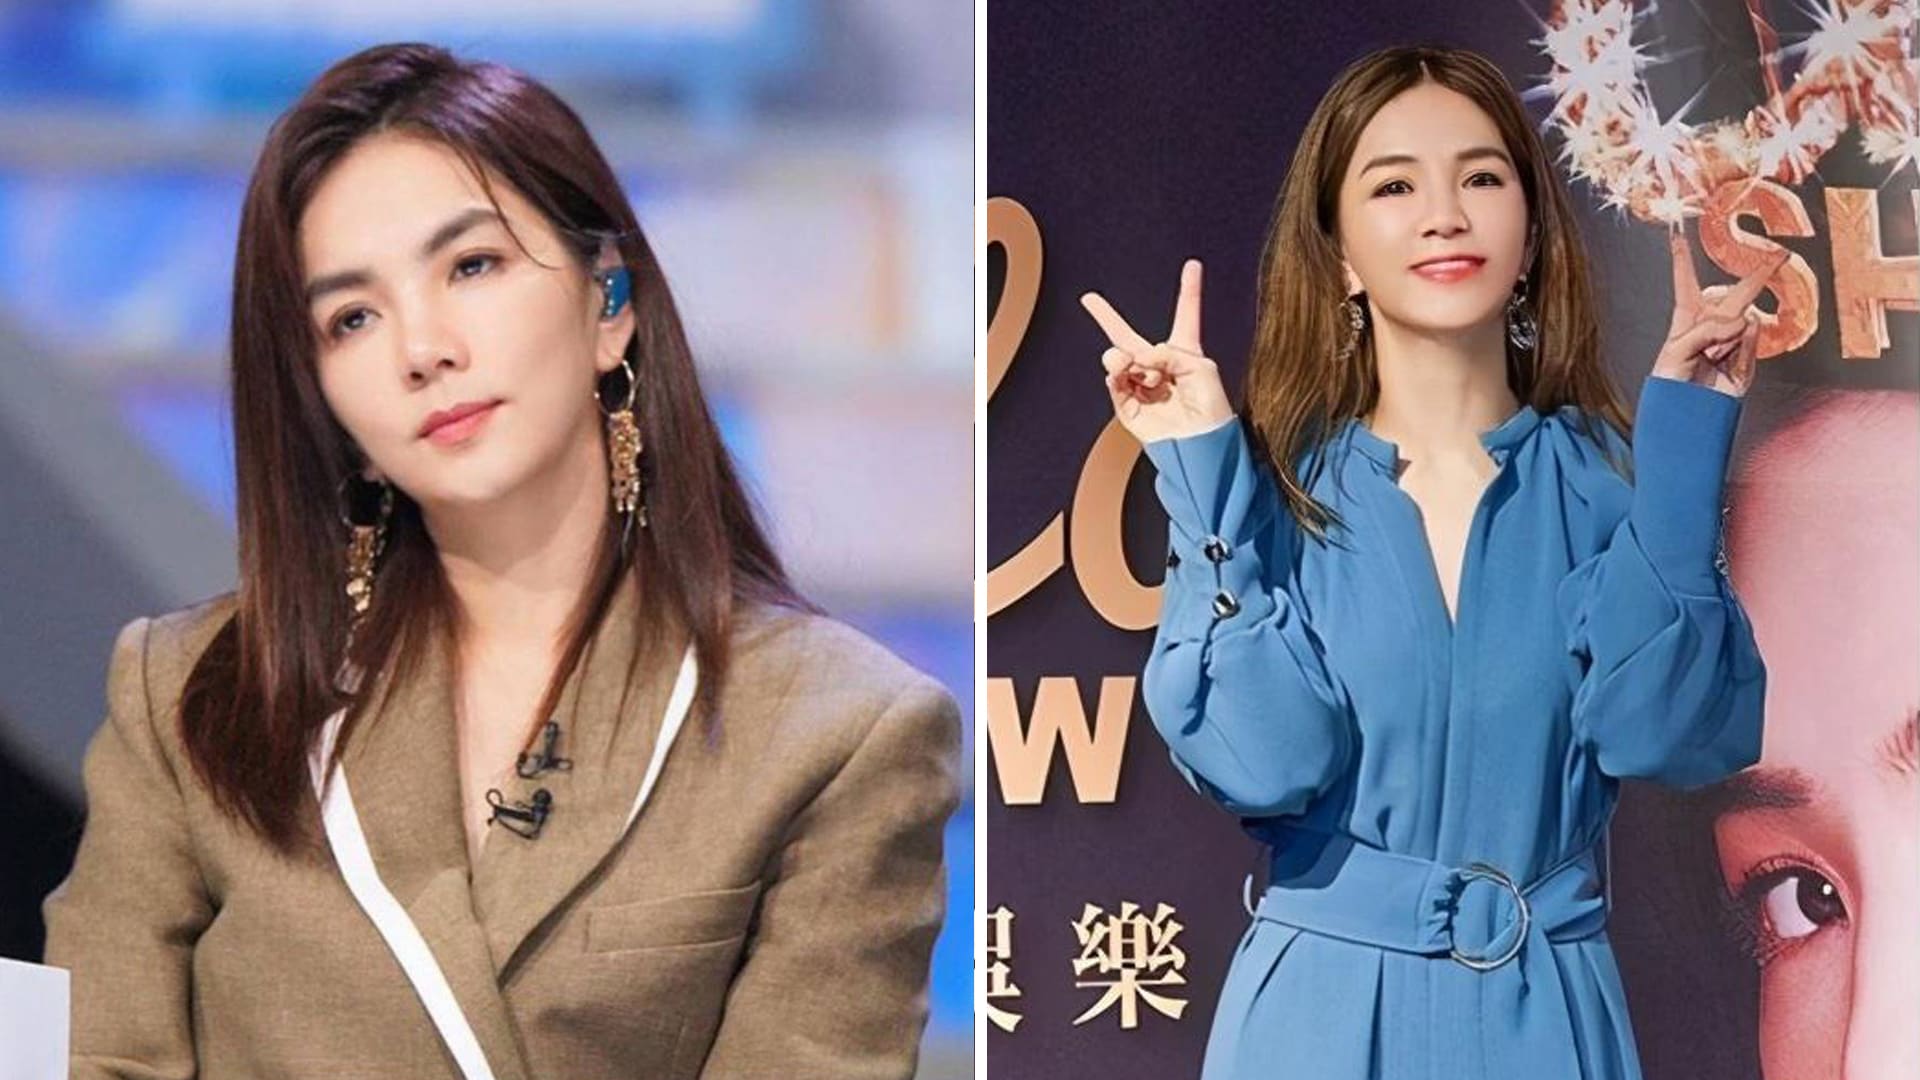 Ella Chen Is So Heavily Photoshopped In New Pics She's Practically Unrecognisable